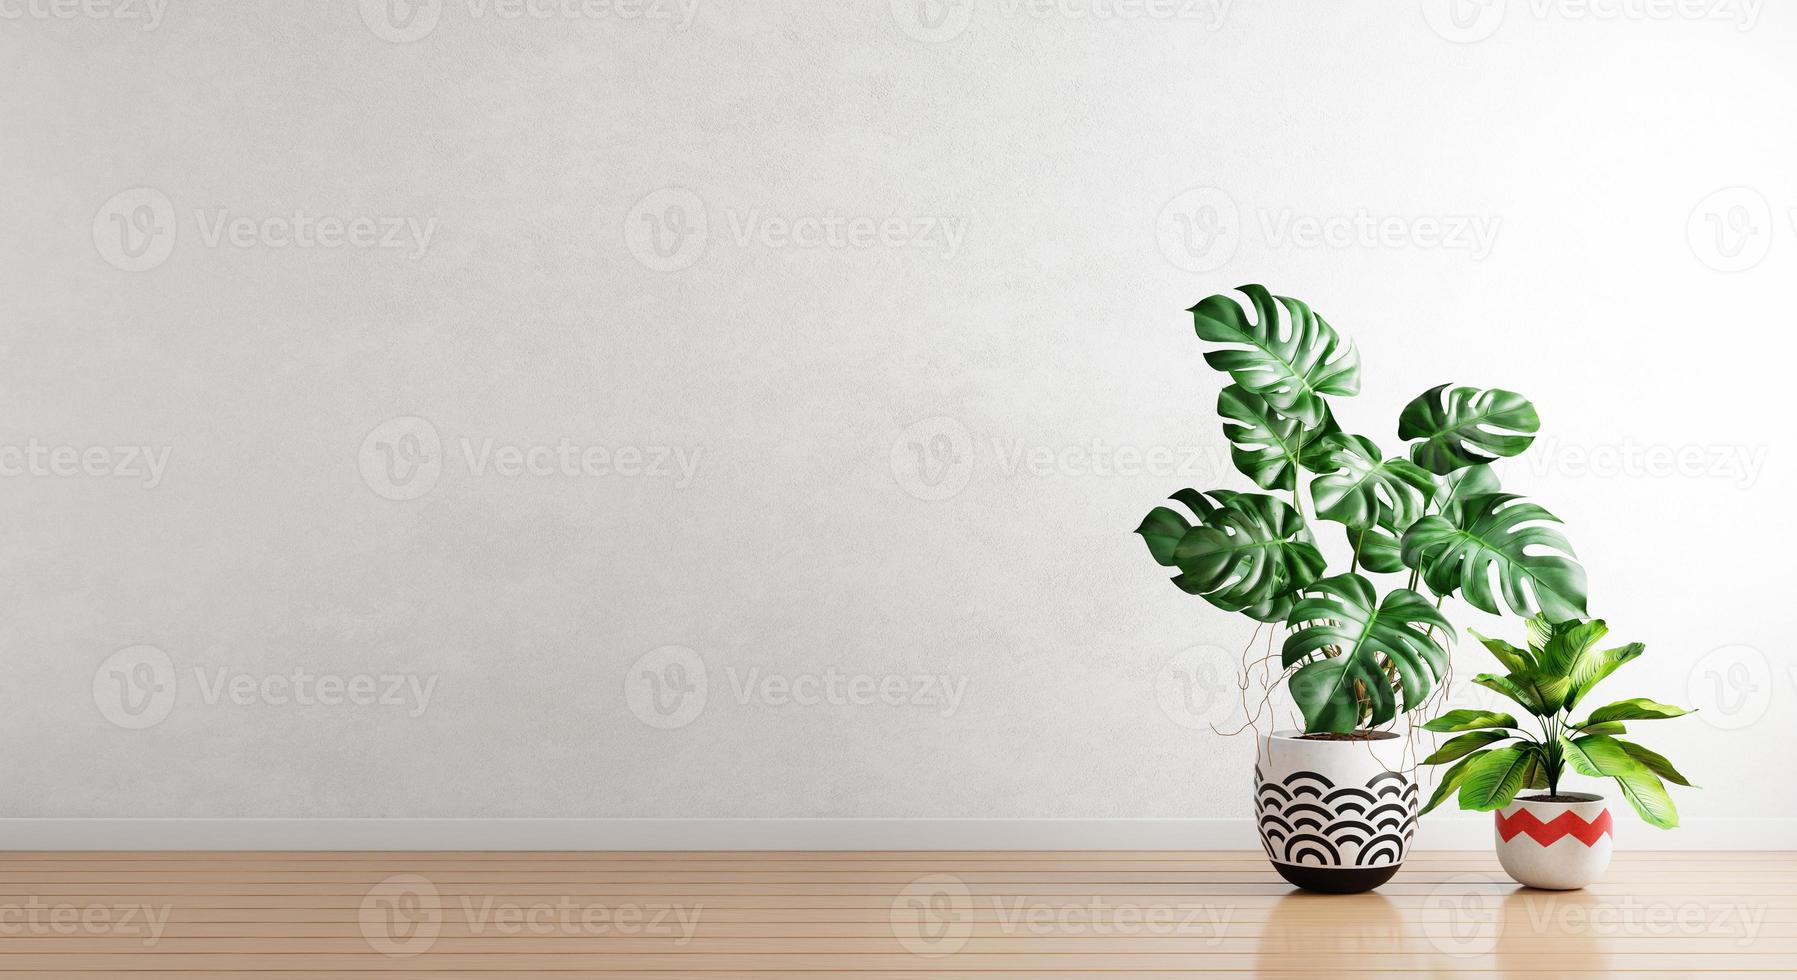 Green plants in houseplants pot with white empty wall background. Interior architecture and natural concept. 3D illustration rendering photo